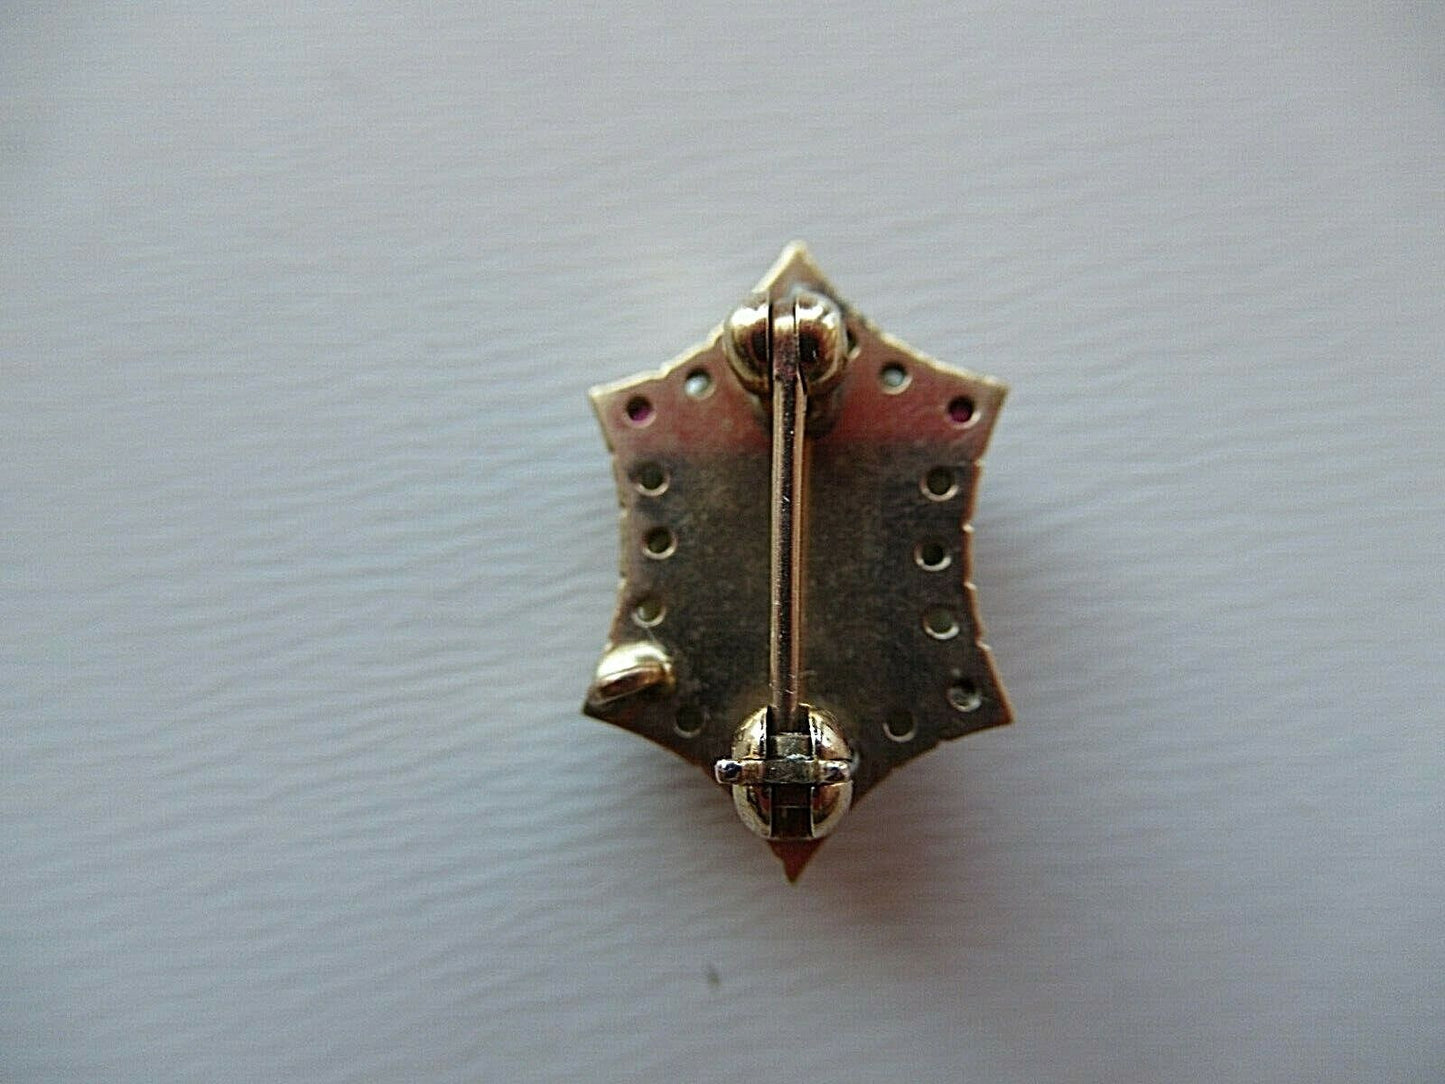 USA FRATERNITY PIN ALPHA PI CHI. MADE IN GOLD. RUBIES. 1235